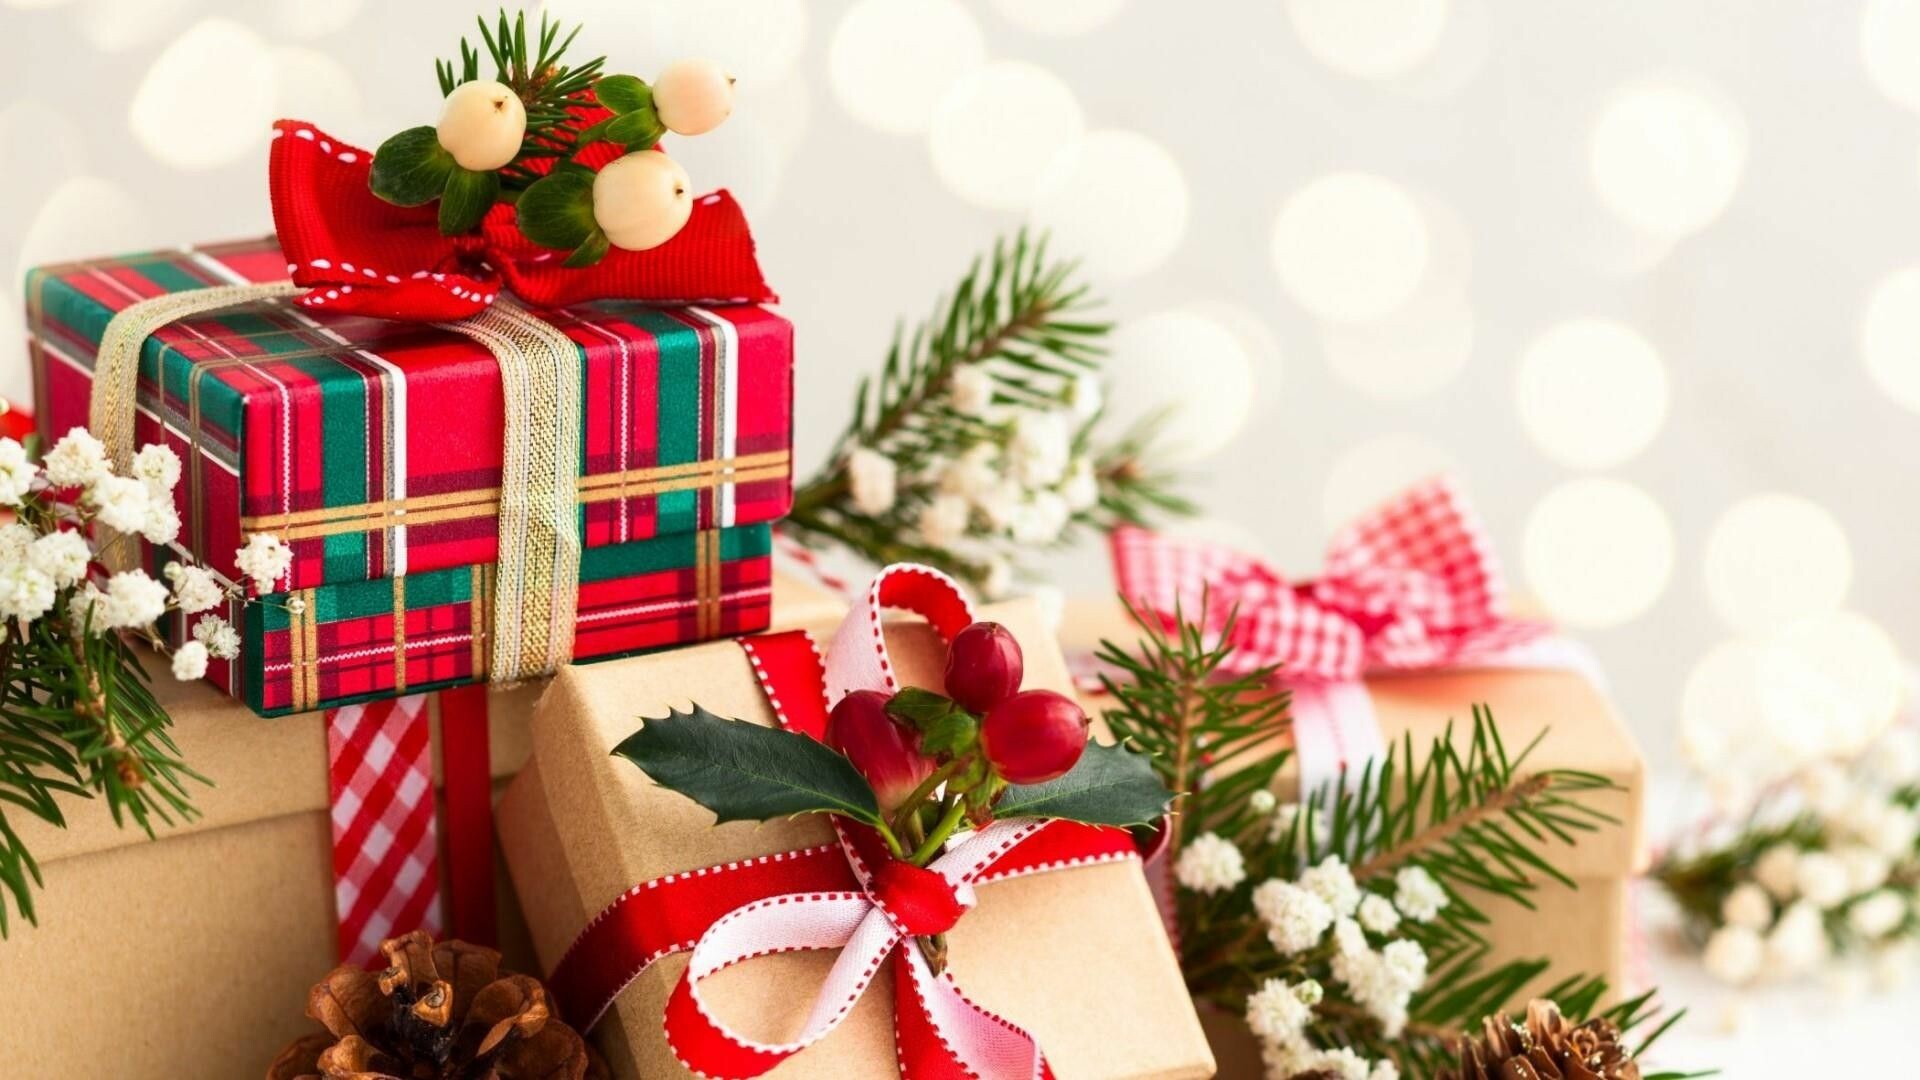 Christmas Gifts: Presents, Delivers by Santa Claus under the holiday tree. 1920x1080 Full HD Wallpaper.